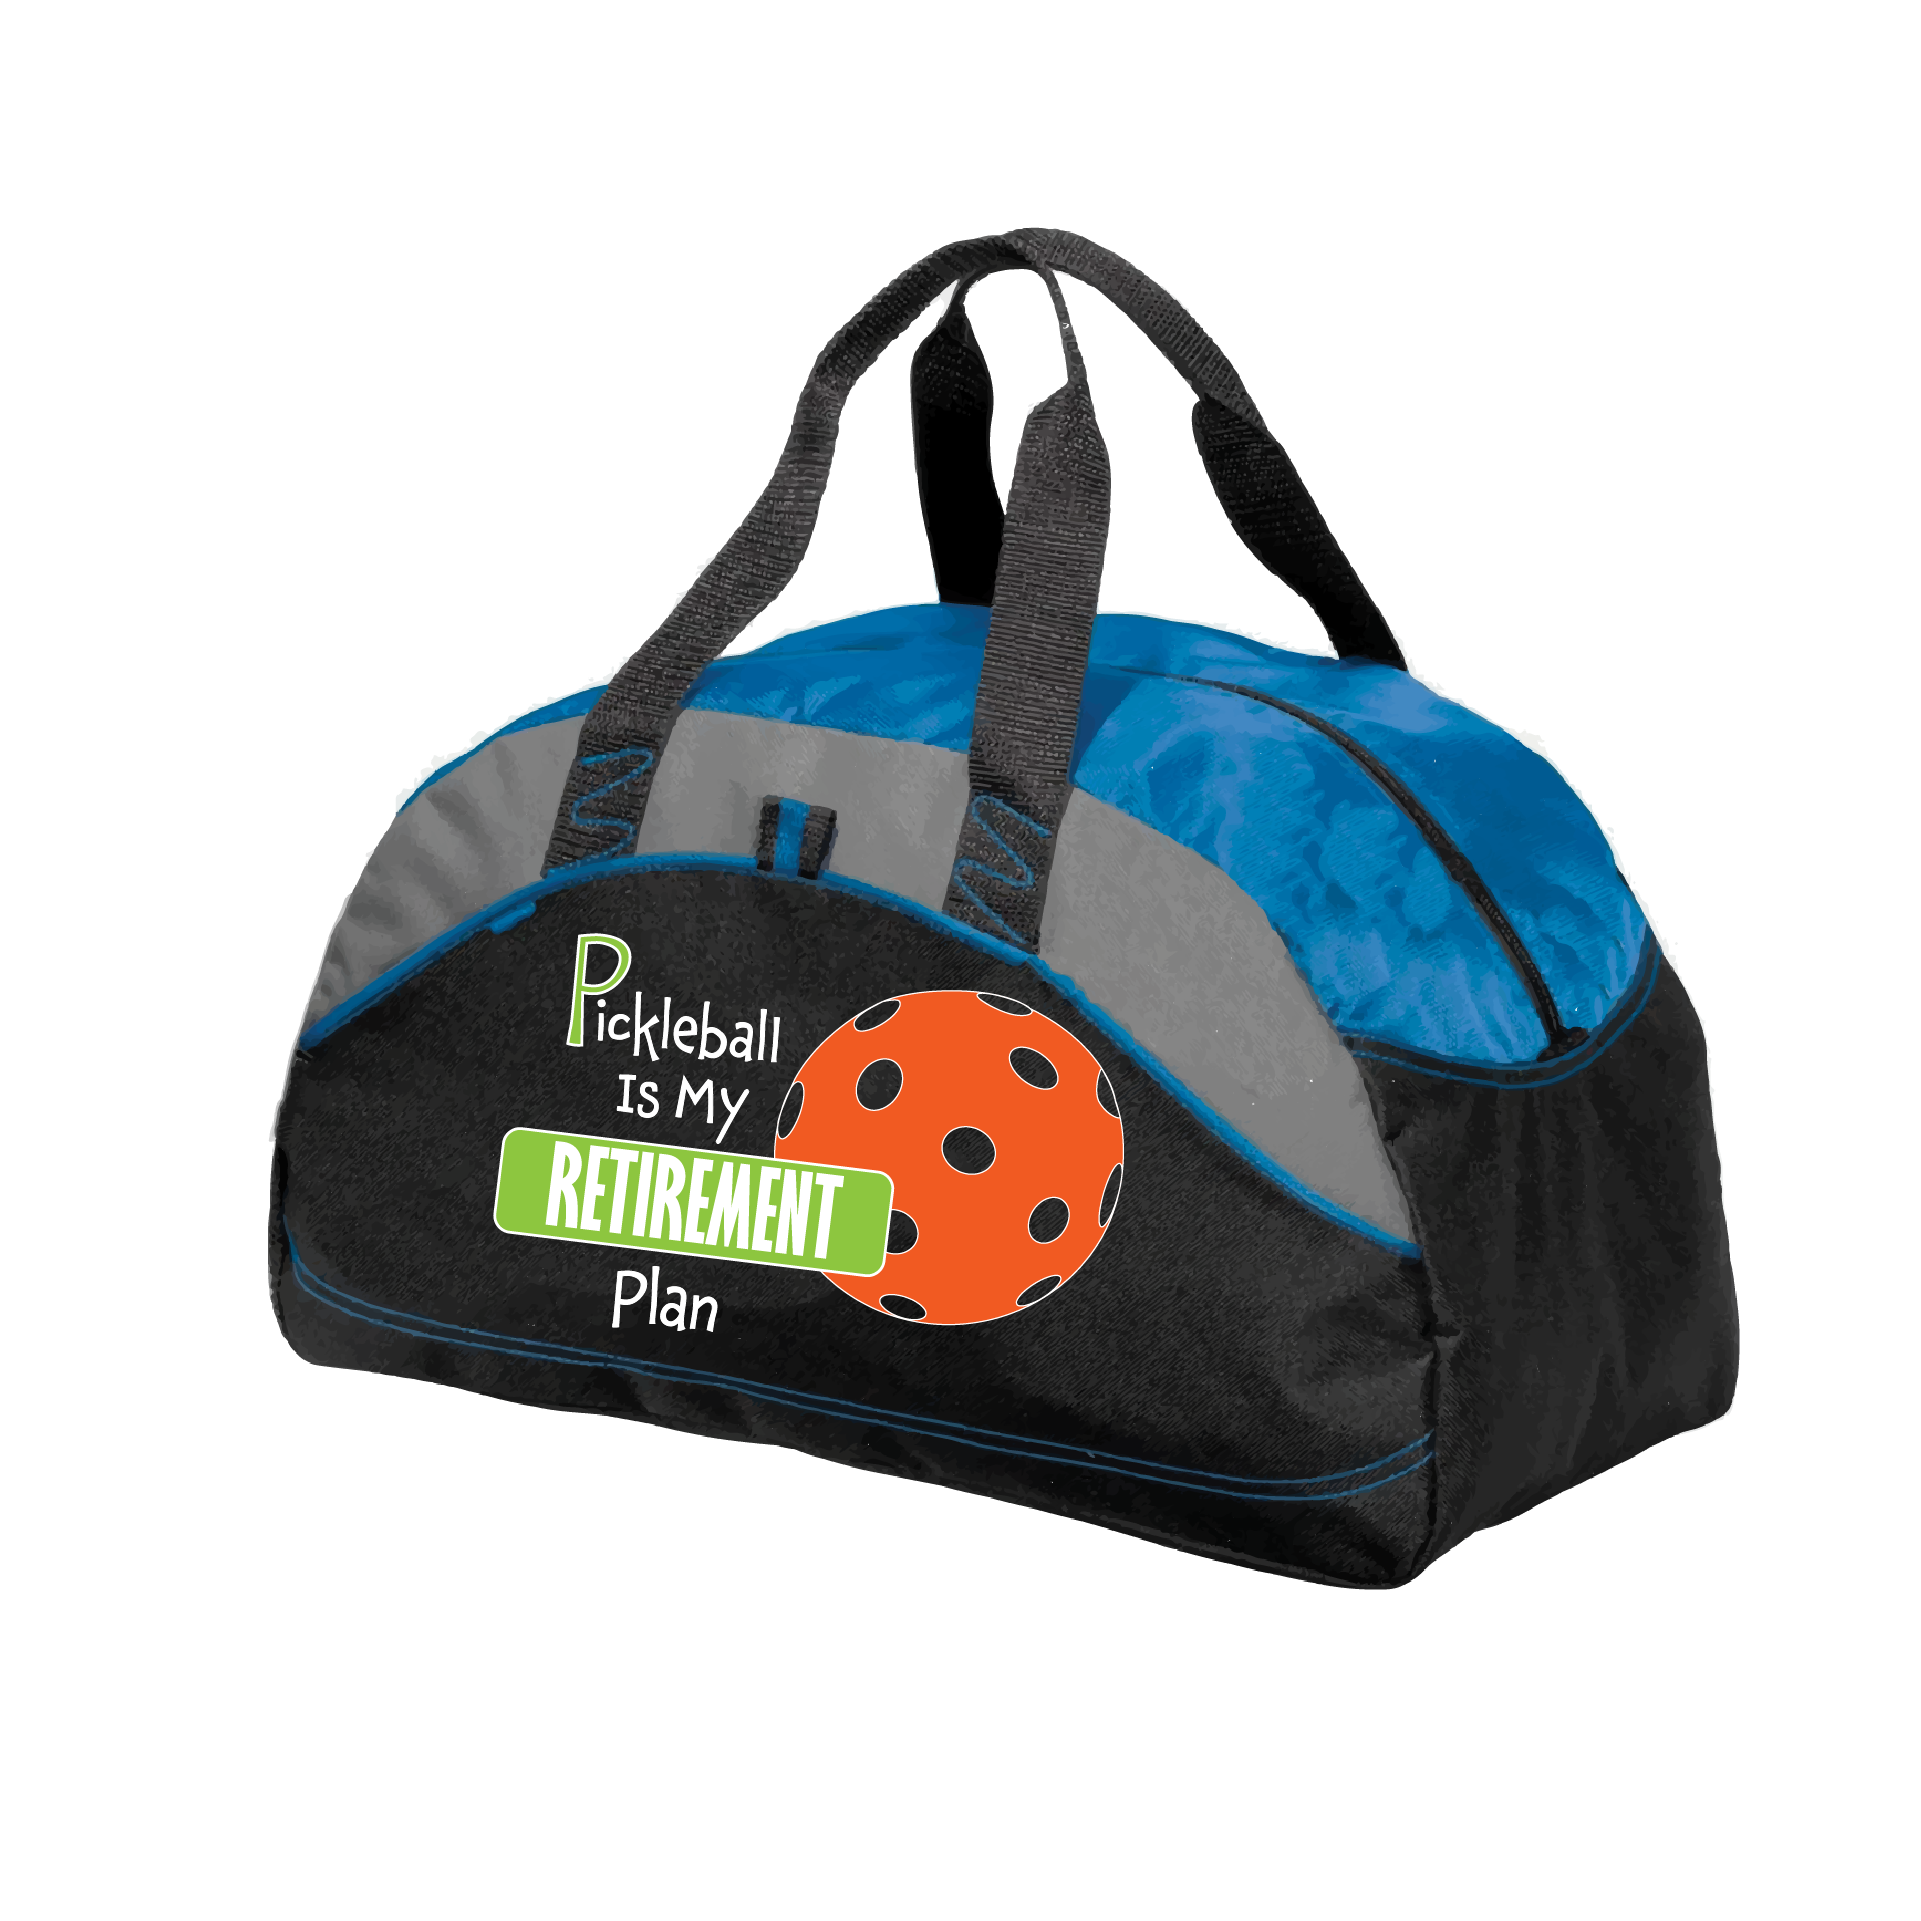 Pickleball Duffel Bag Design: Retirement Plan  Carry your gear in comfort and style. This fun pickleball duffel bag is the perfect accessory for all pickleball players needing to keep their gear in one place. This medium sized duffel tote is ideal for all your pickleball activities. The large center compartment allows for plenty of space and the mesh end pocket is perfect for holding a water bottle. 